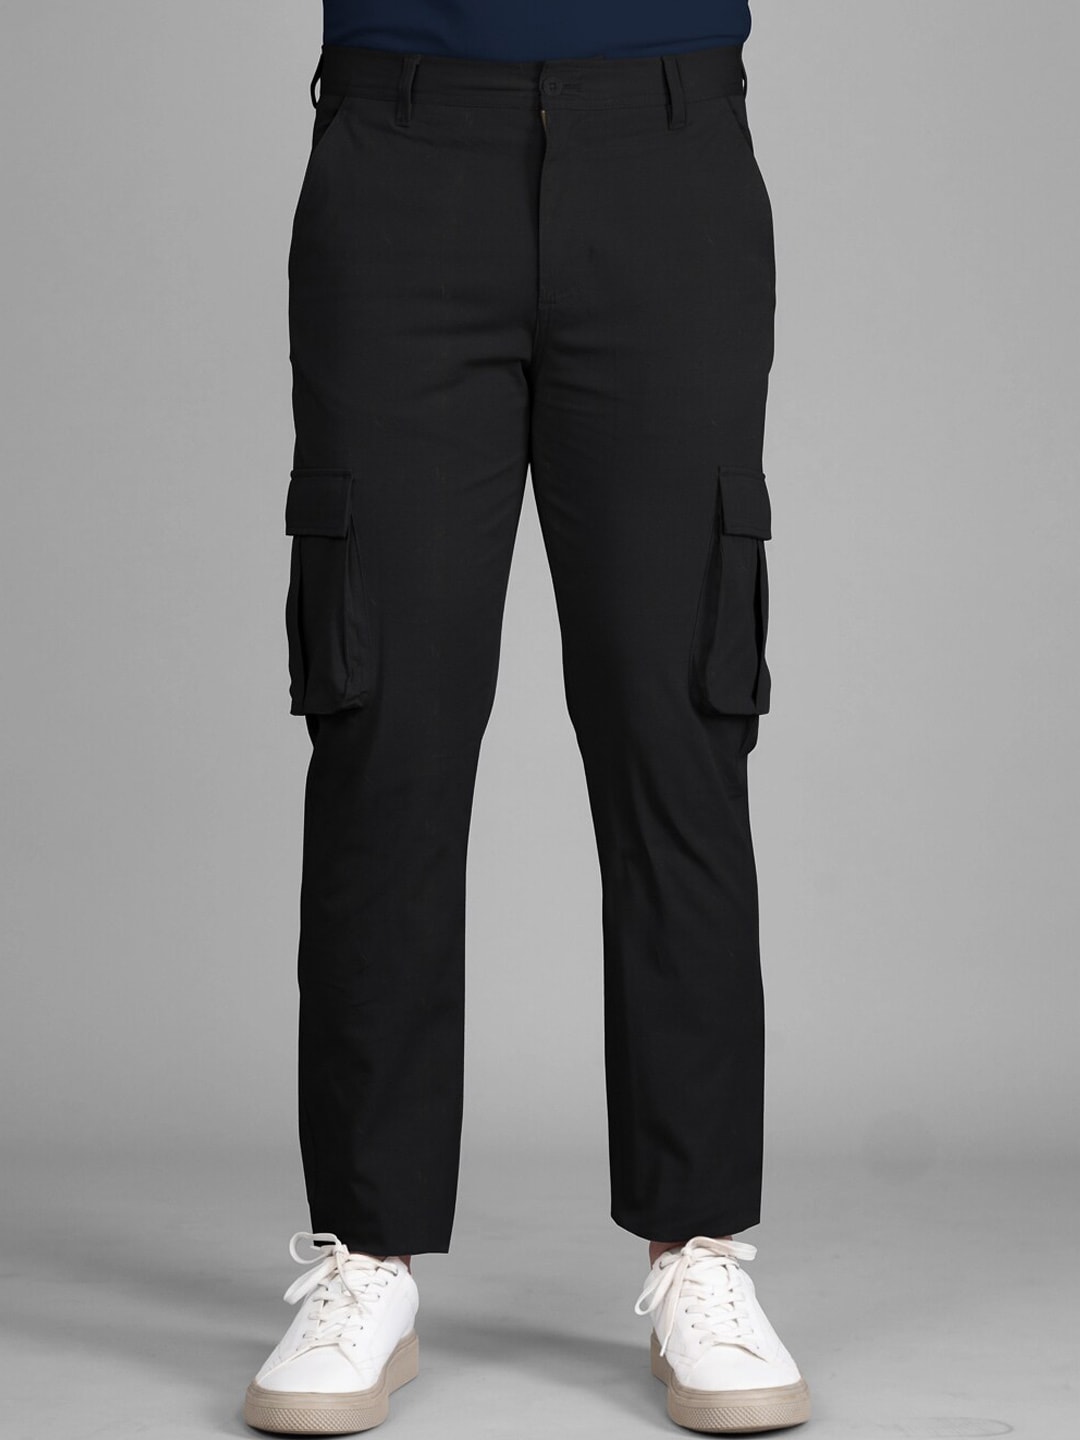 The Pant Project Men Tailored Slim Fit Wrinkle Free Cargos Trousers